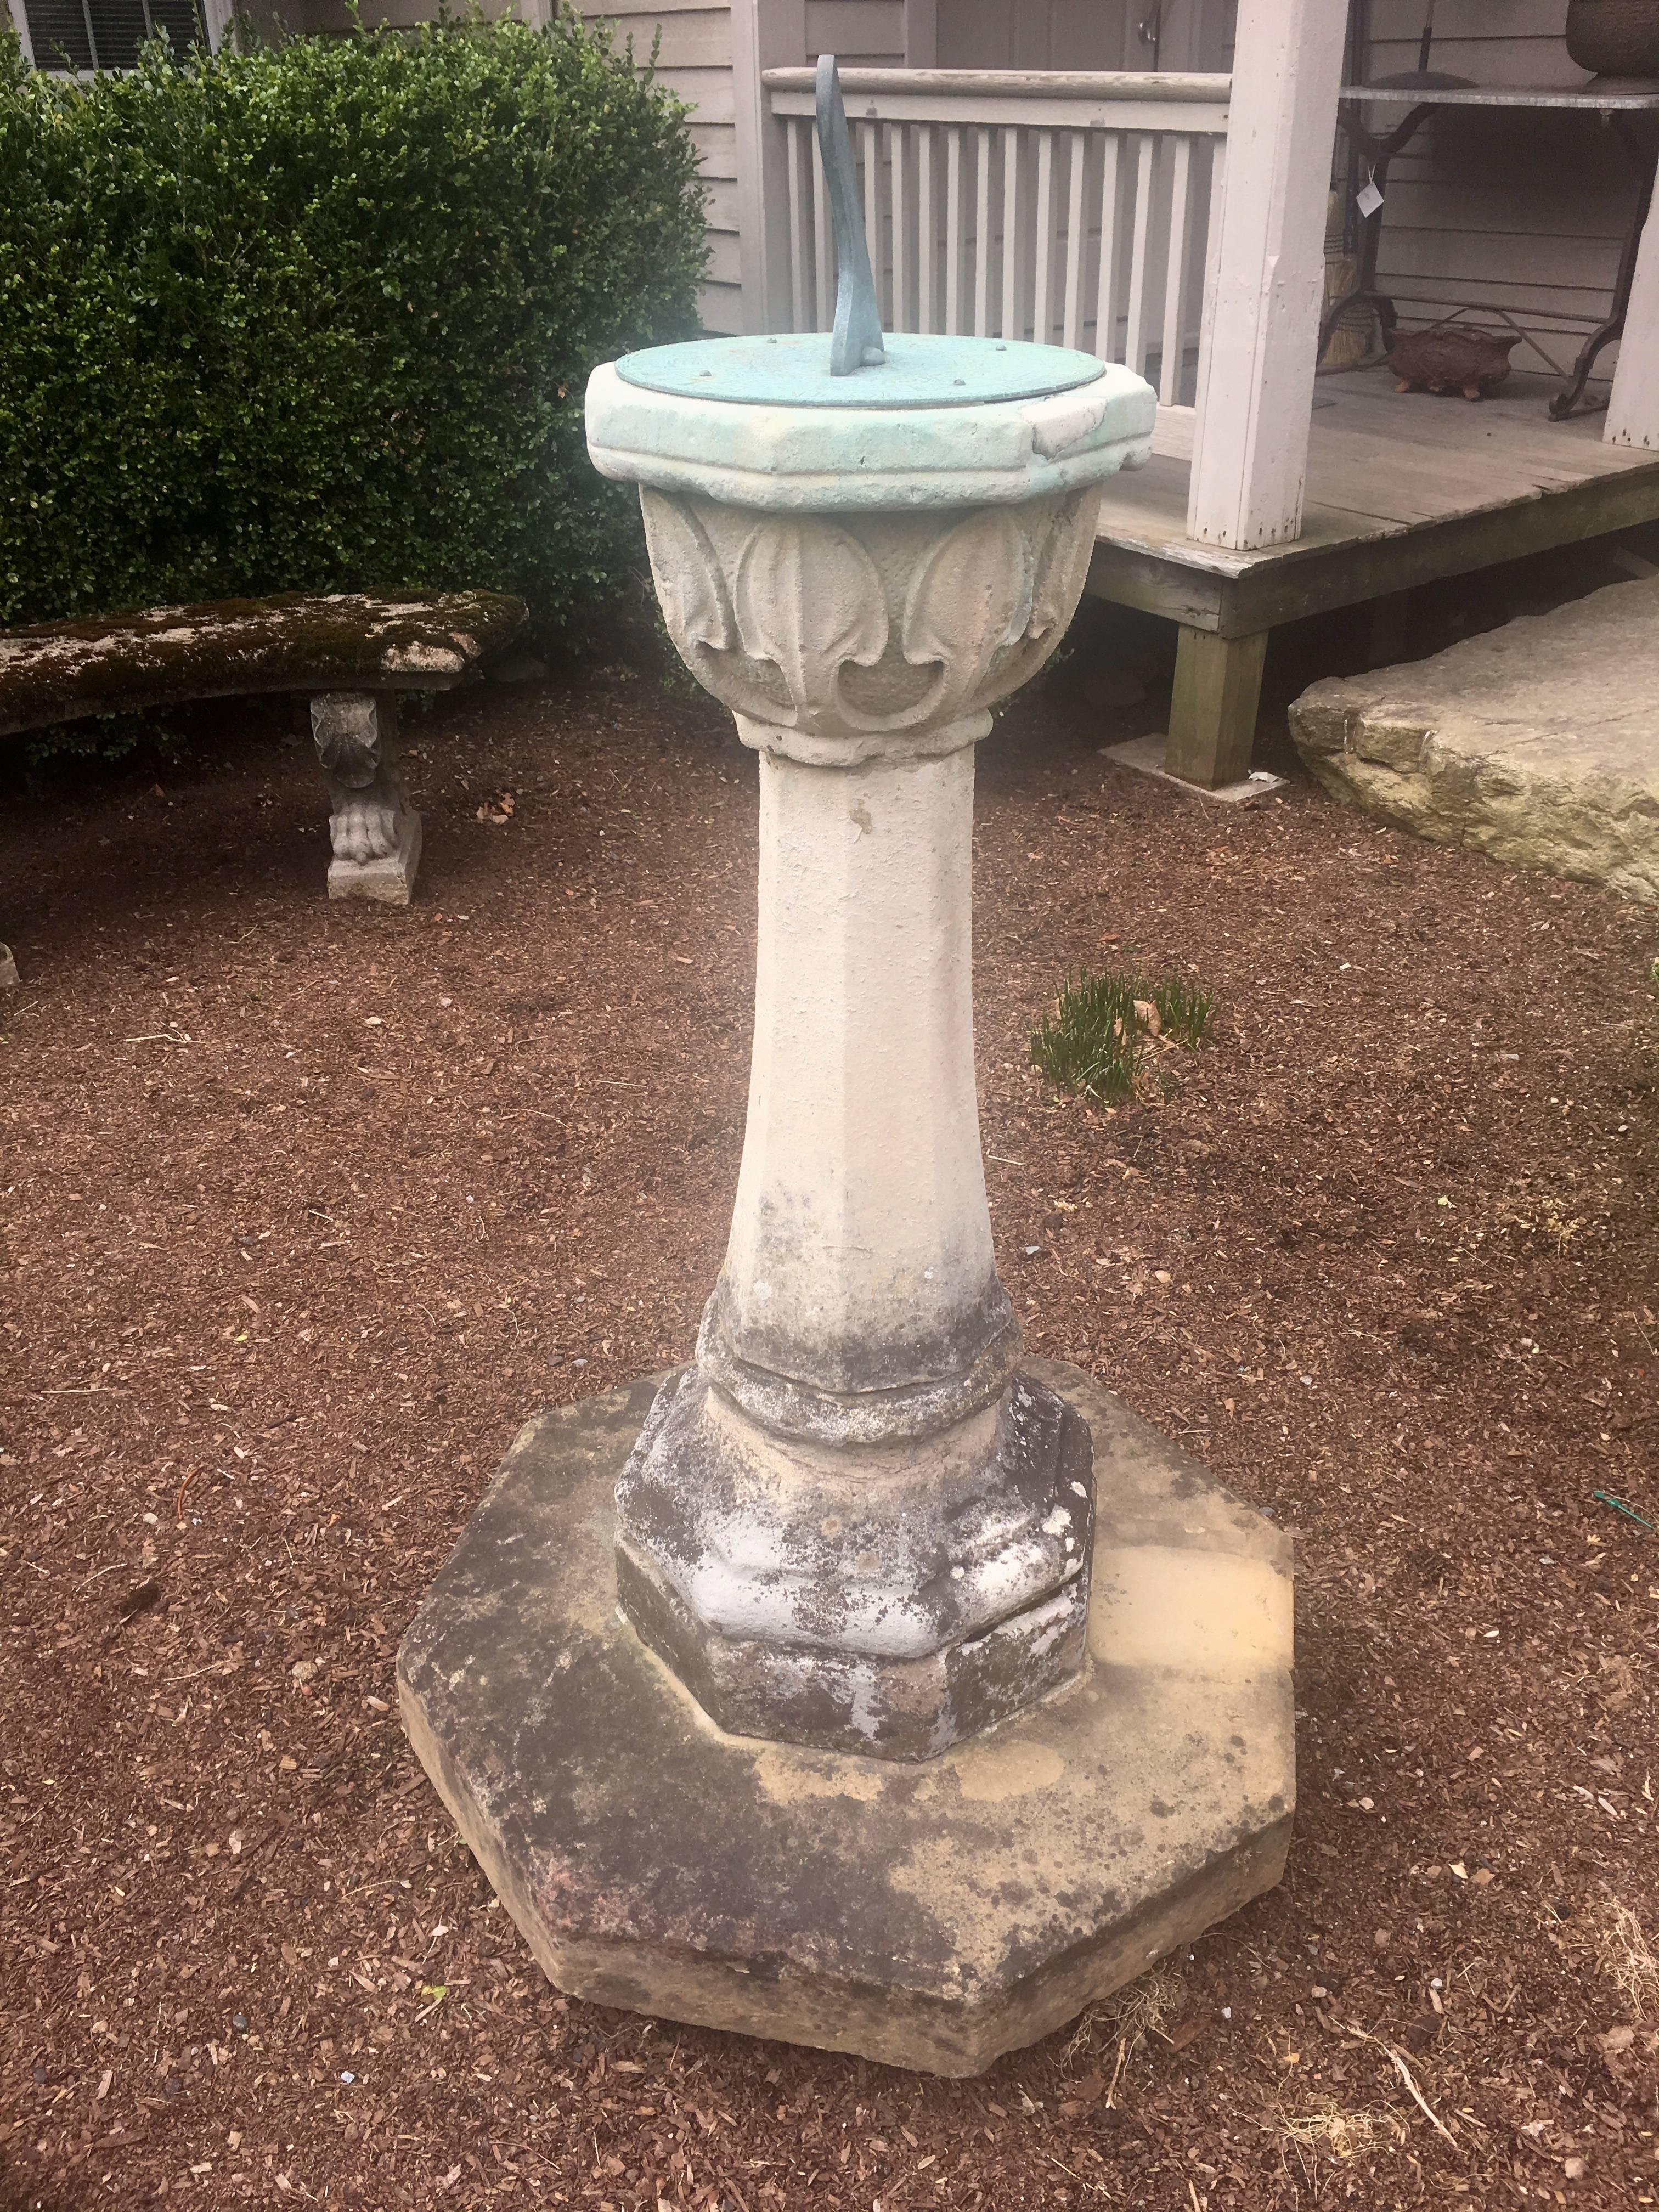 This large and impressive Arts and Crafts sundial in three parts is the best we`ve seen in a good long time. Hand-carved from a heavily fossilized stone, it appears to have been married to an octagonal carved sandstone base and we believe the bronze